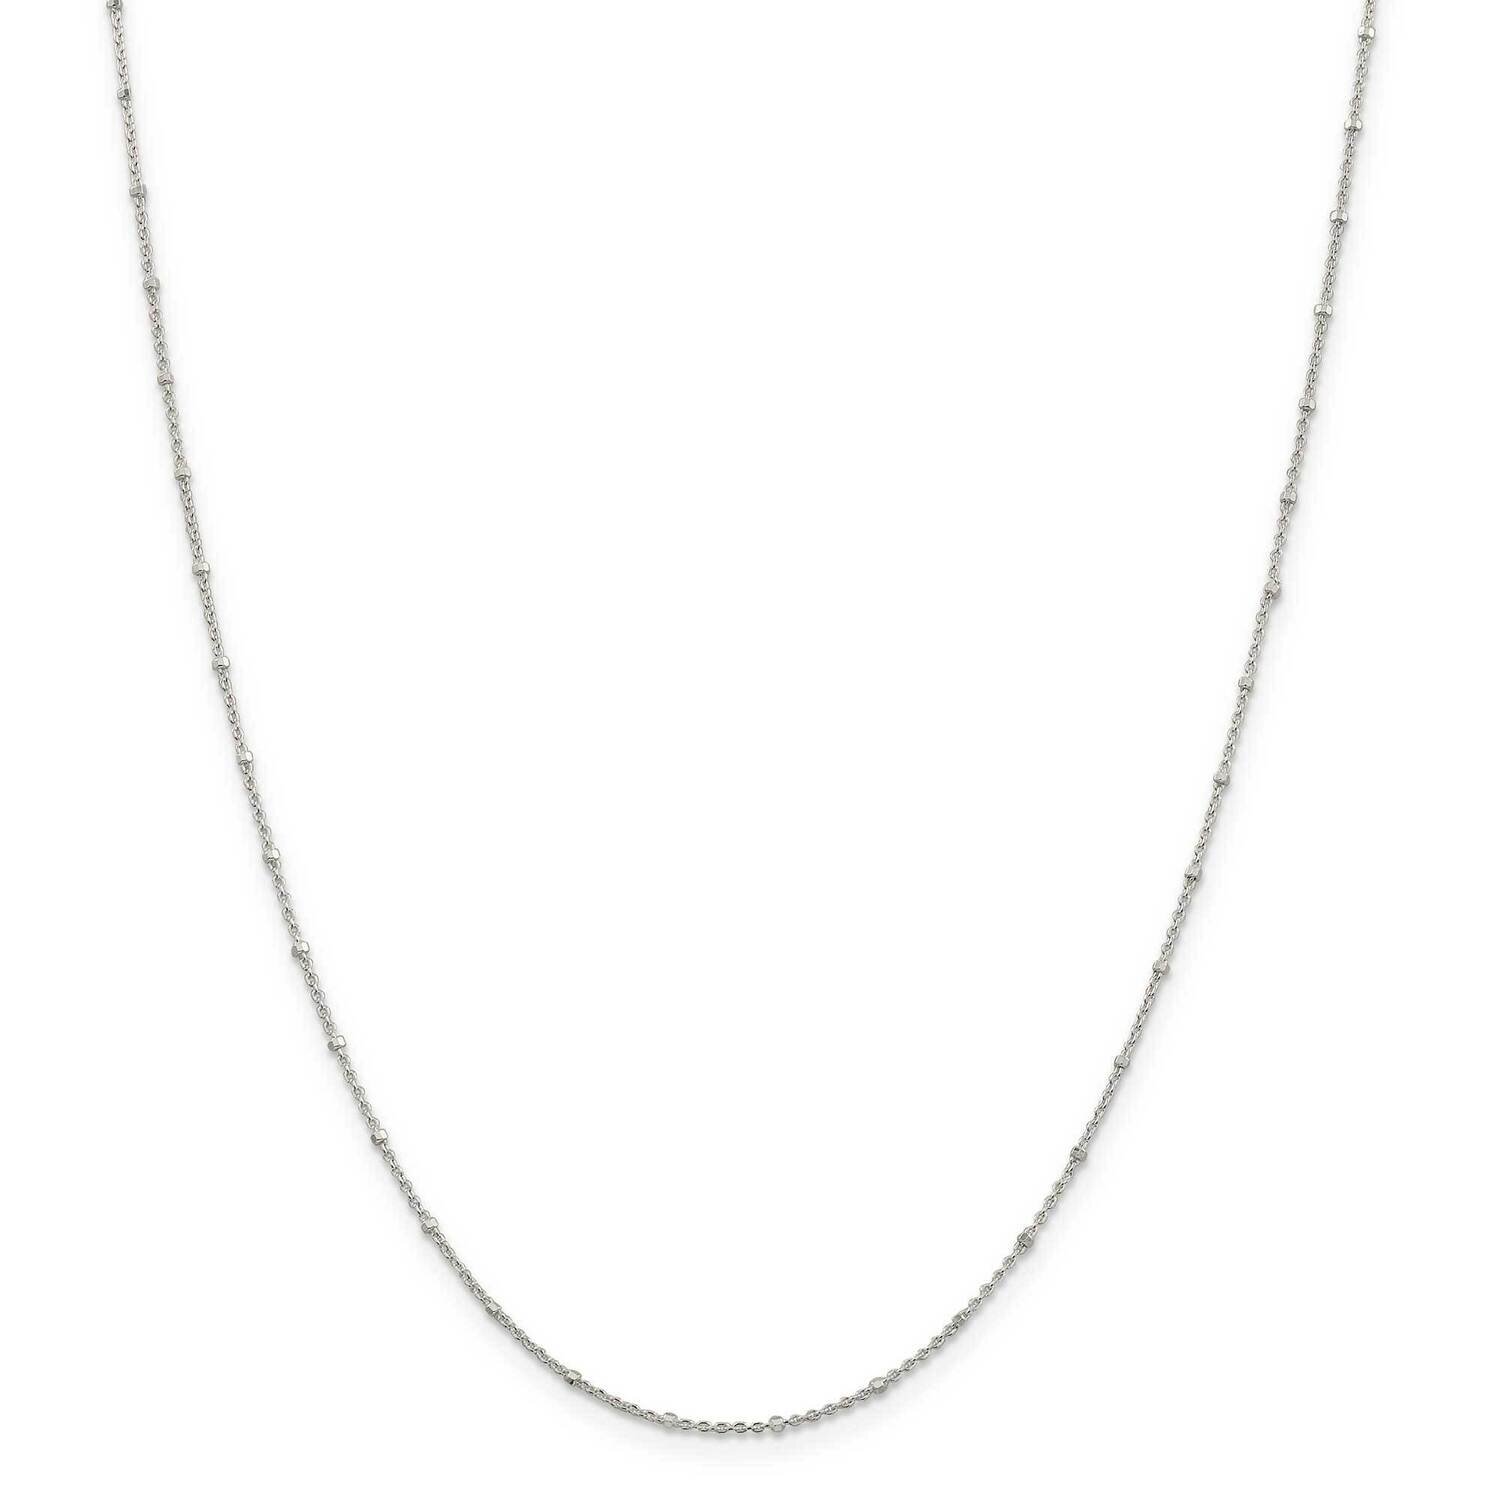 1.25mm Rolo with Beads Chain with 4 Inch Extender 22 Inch Sterling Silver QFC163E-22